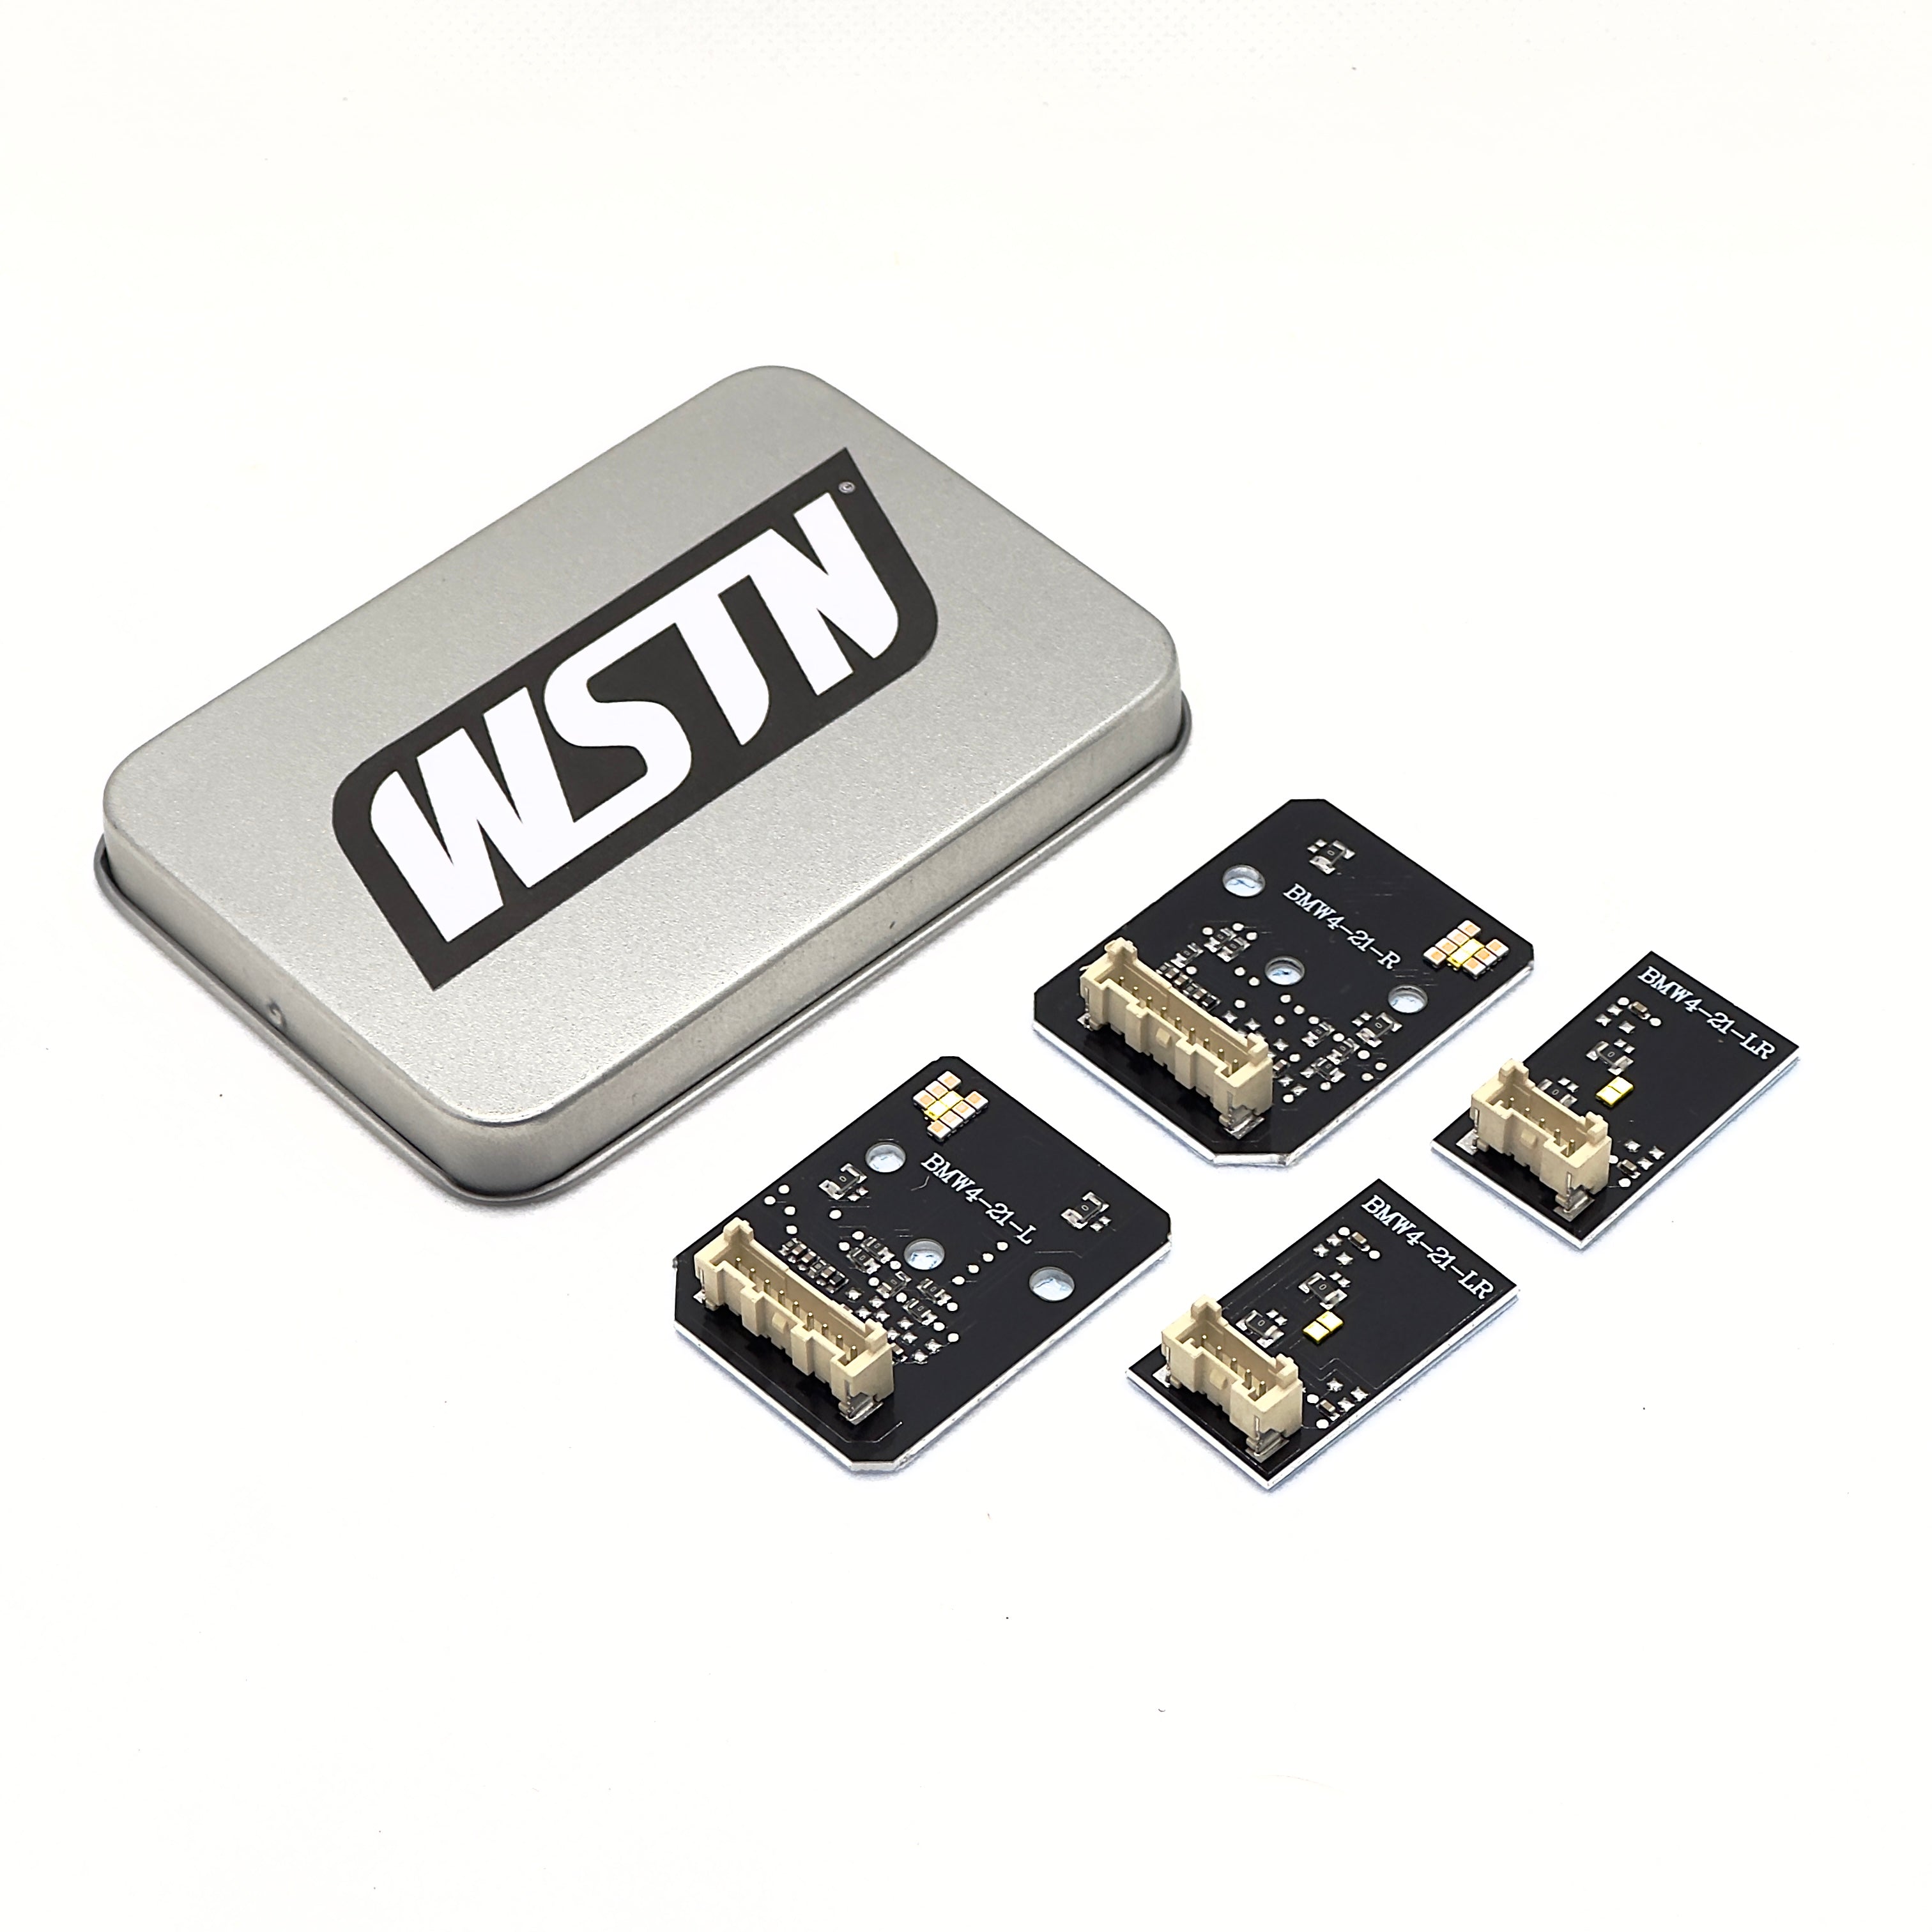 Image showing a set of four WSTN Performance BMW M3/M4/4 Series Yellow CSL DRL Daytime Running Lights LED Module Set, alongside a metal storage tin with the WSTN logo prominently displayed. The modules appear to be suitable for various models, including G80, G81, G82, G83, and G22, in regions like the USA, UK, EU, and Australia